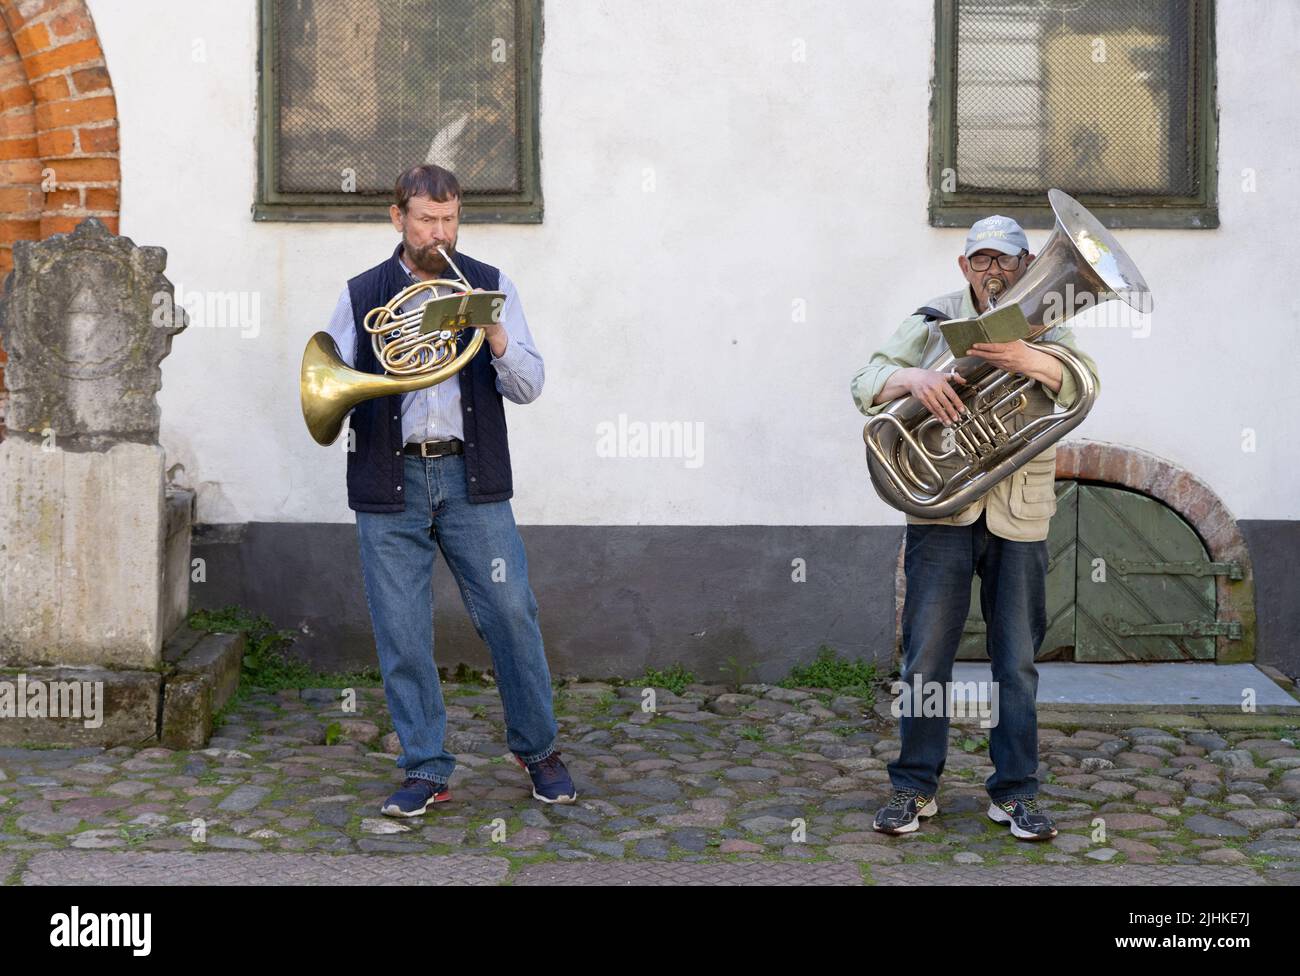 Street musicians - two middle aged men aged 50s playing the french horn and tuba on the streets of Riga Old town, Riga Latvia Europe; - Riga Lifestyle Stock Photo